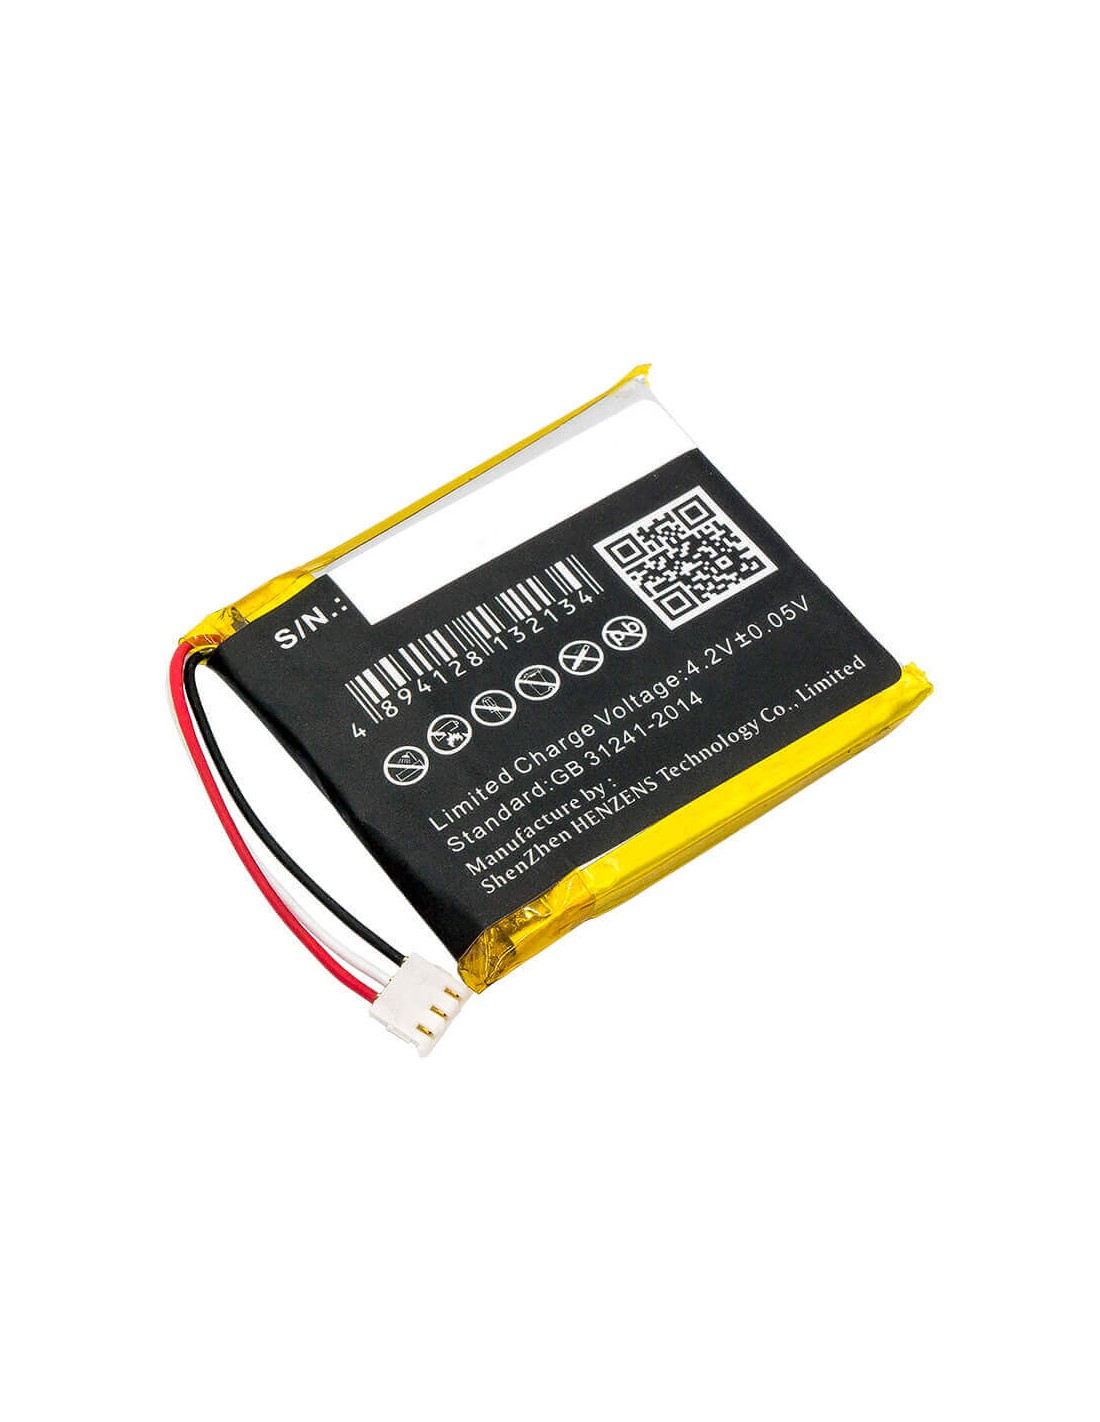 Battery for Codio, K8, T8 3.8V, 450mAh - 1.71Wh